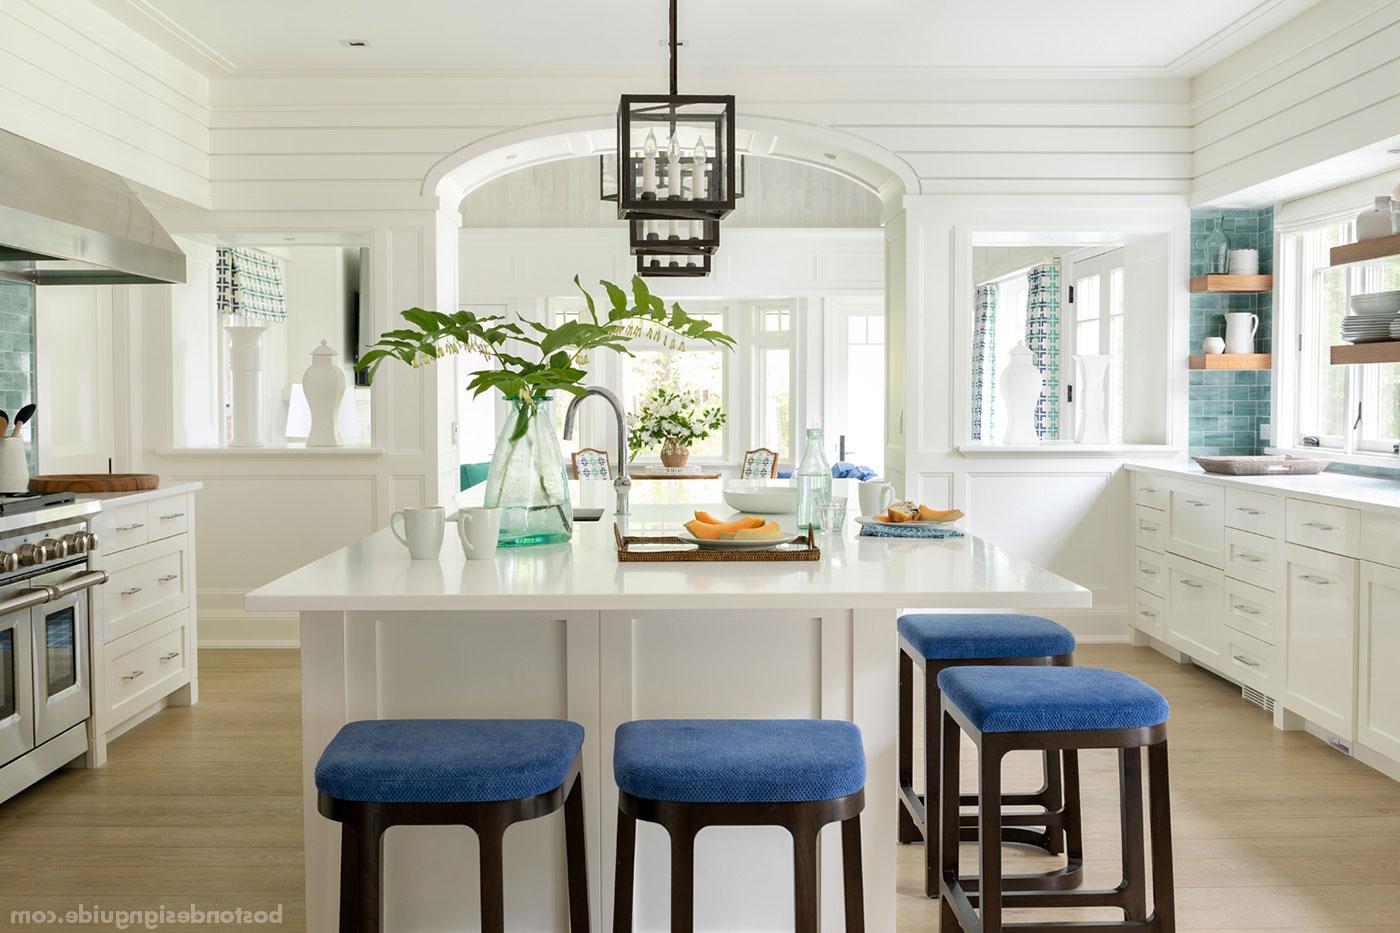 A coastal Cape Cod kitchen within a home designed to house two families